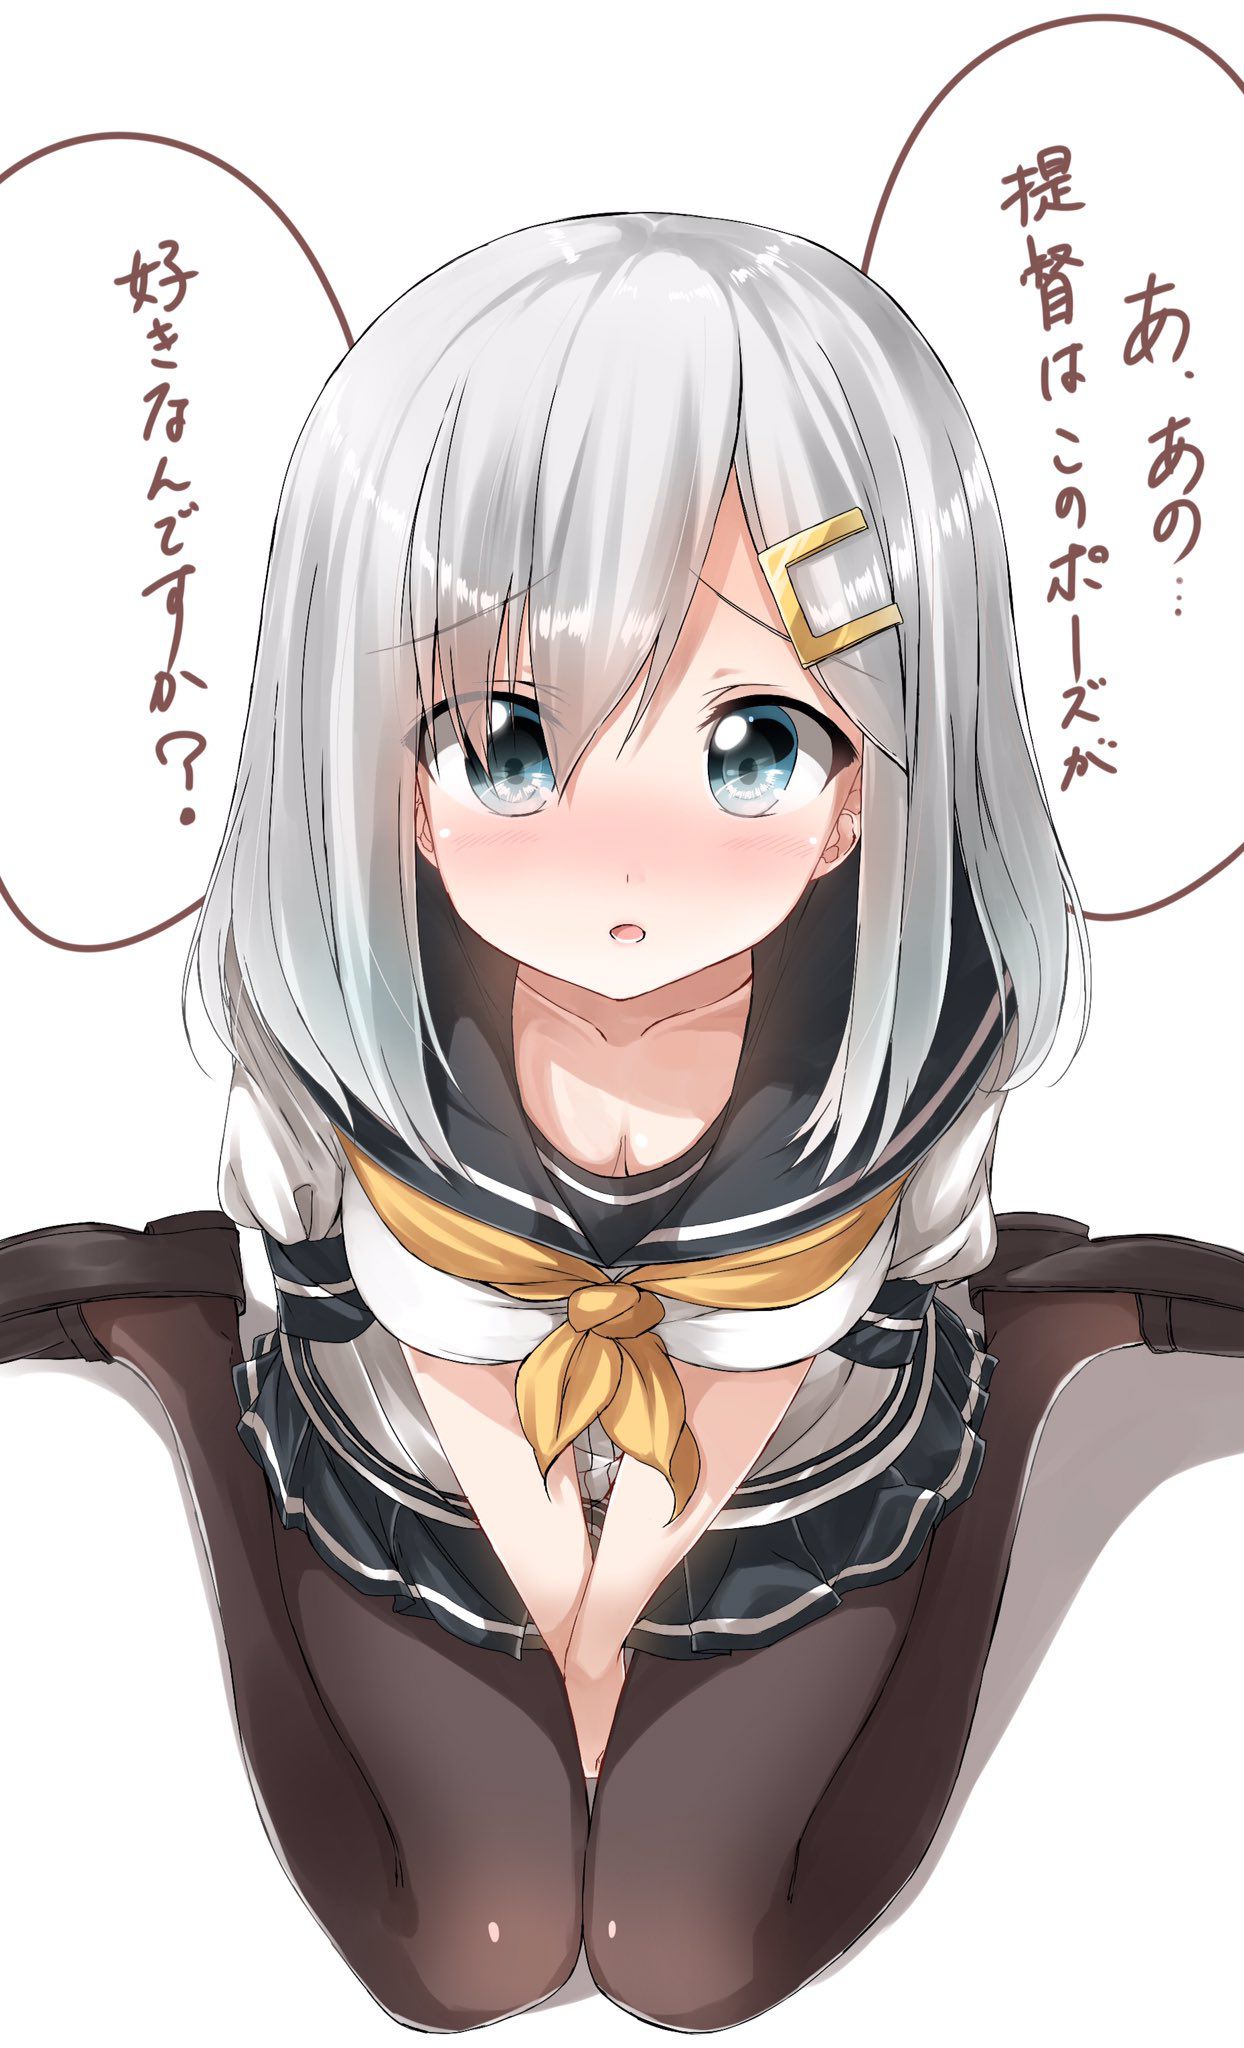 [Ship it] hamakaze erotic pictures so this overwhelming cuteness! 22